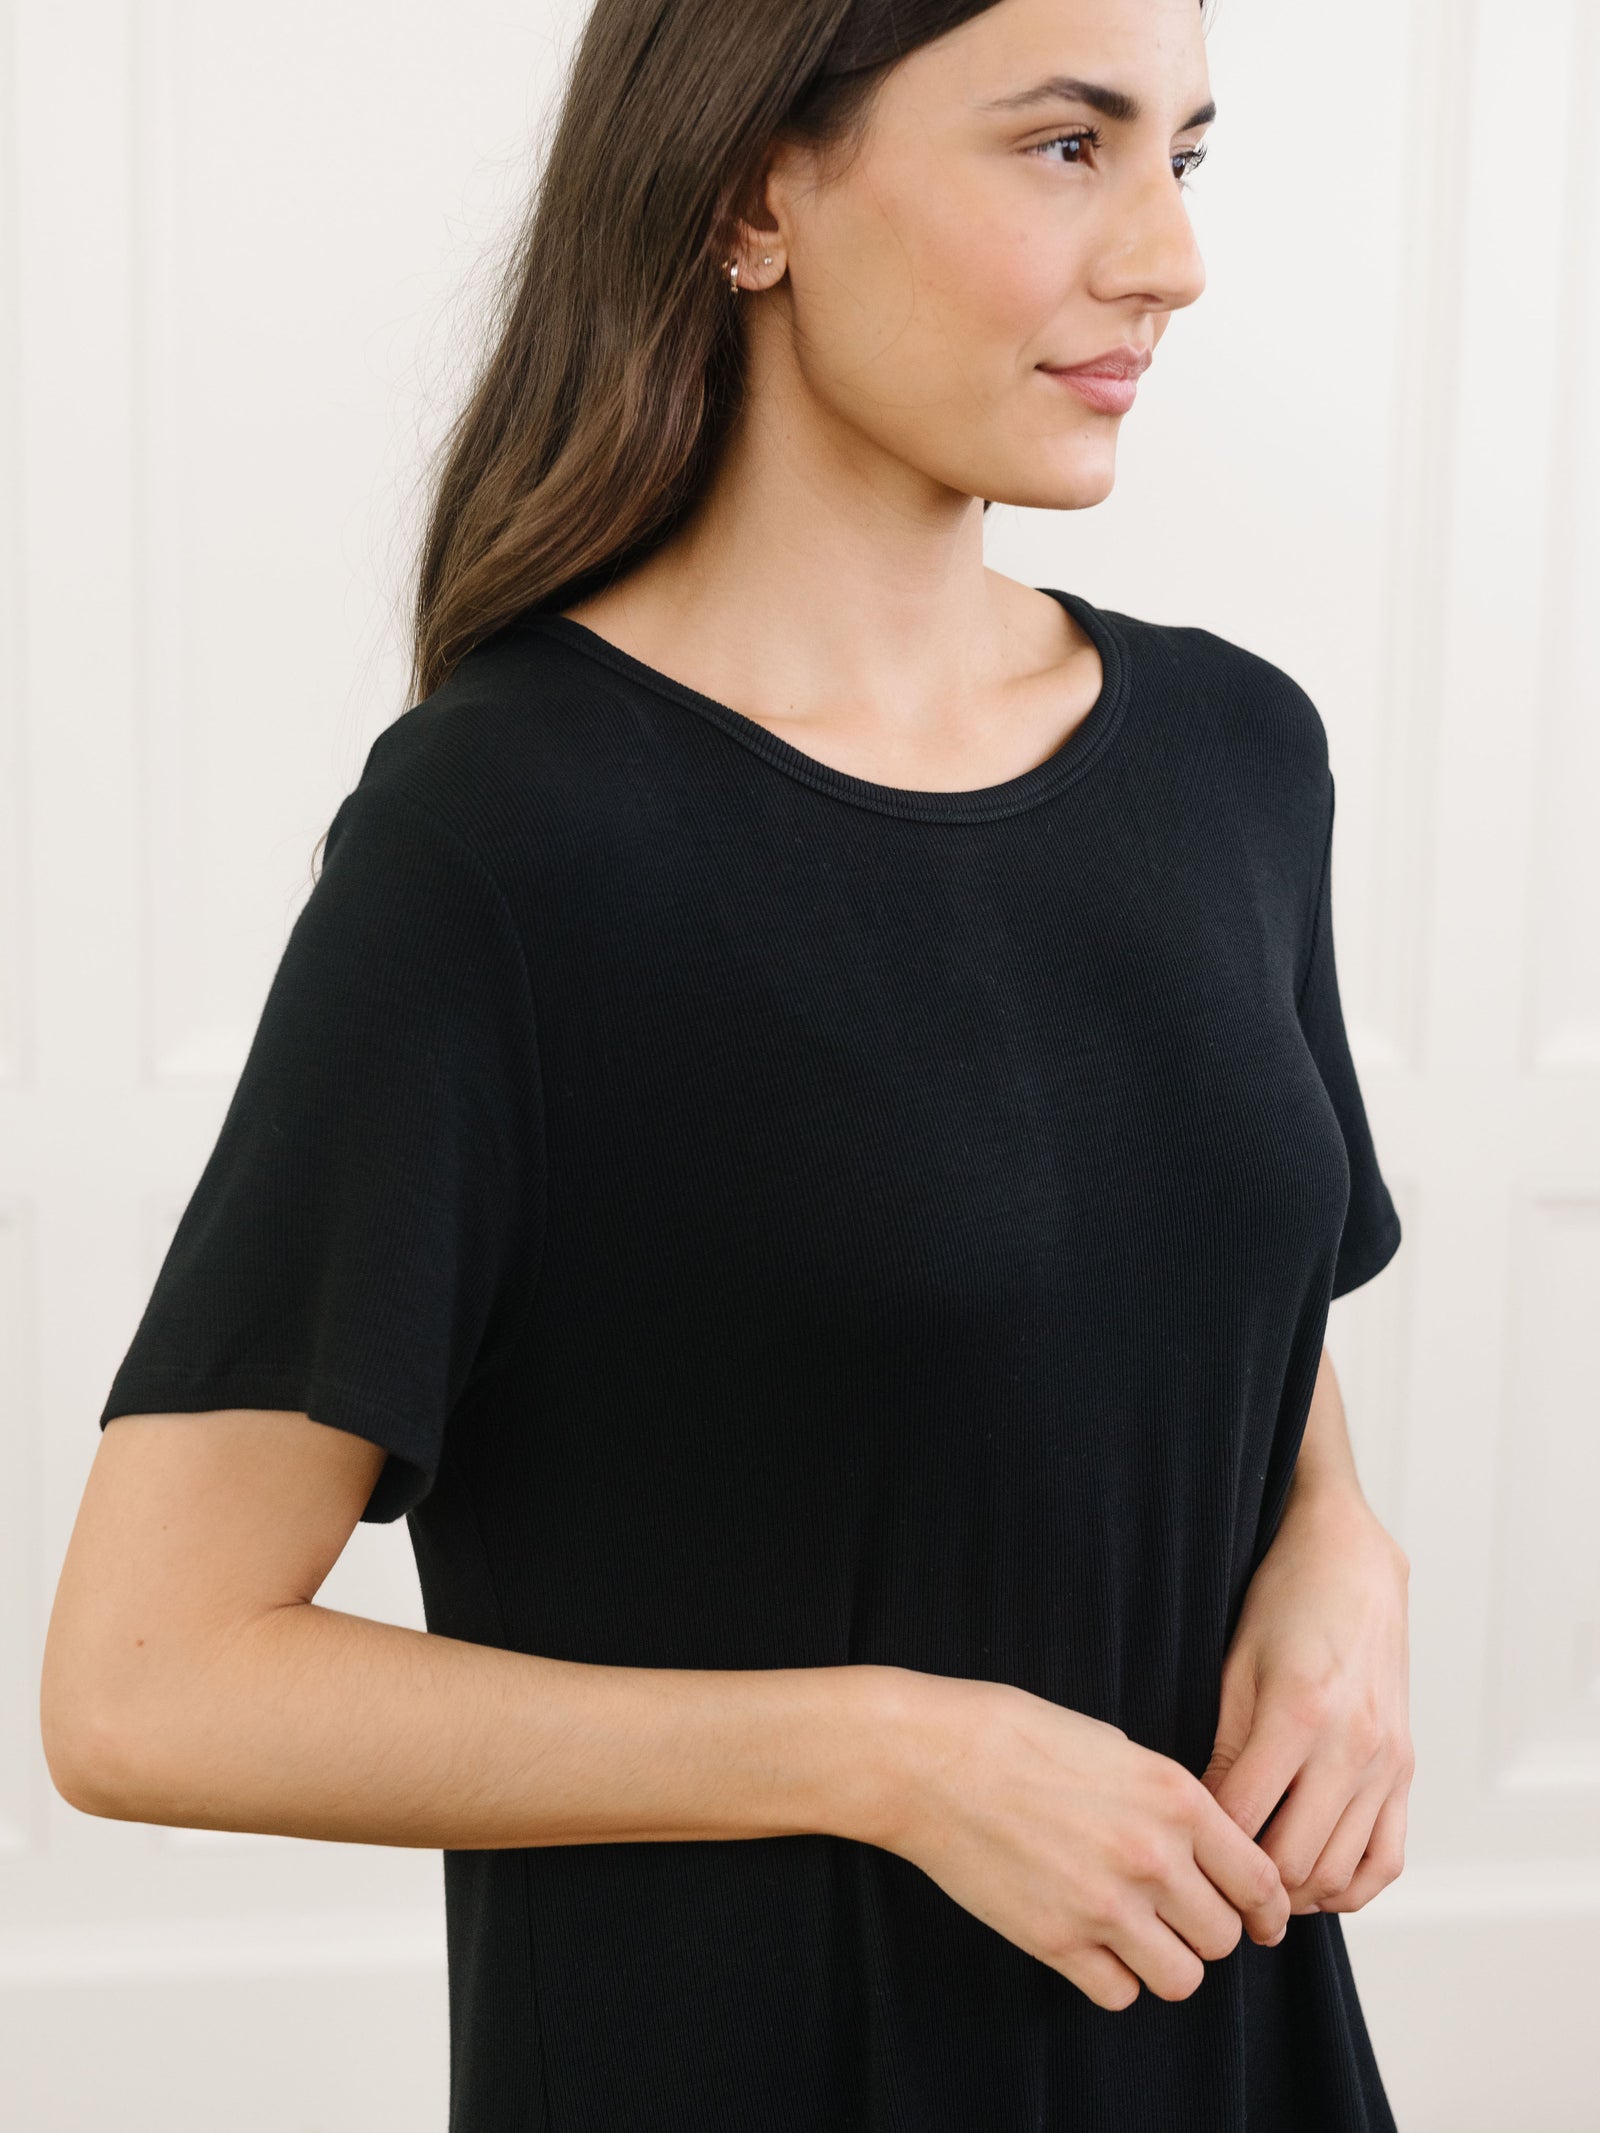 Brushed Ribbed Knit Top - Women - Ready-to-Wear